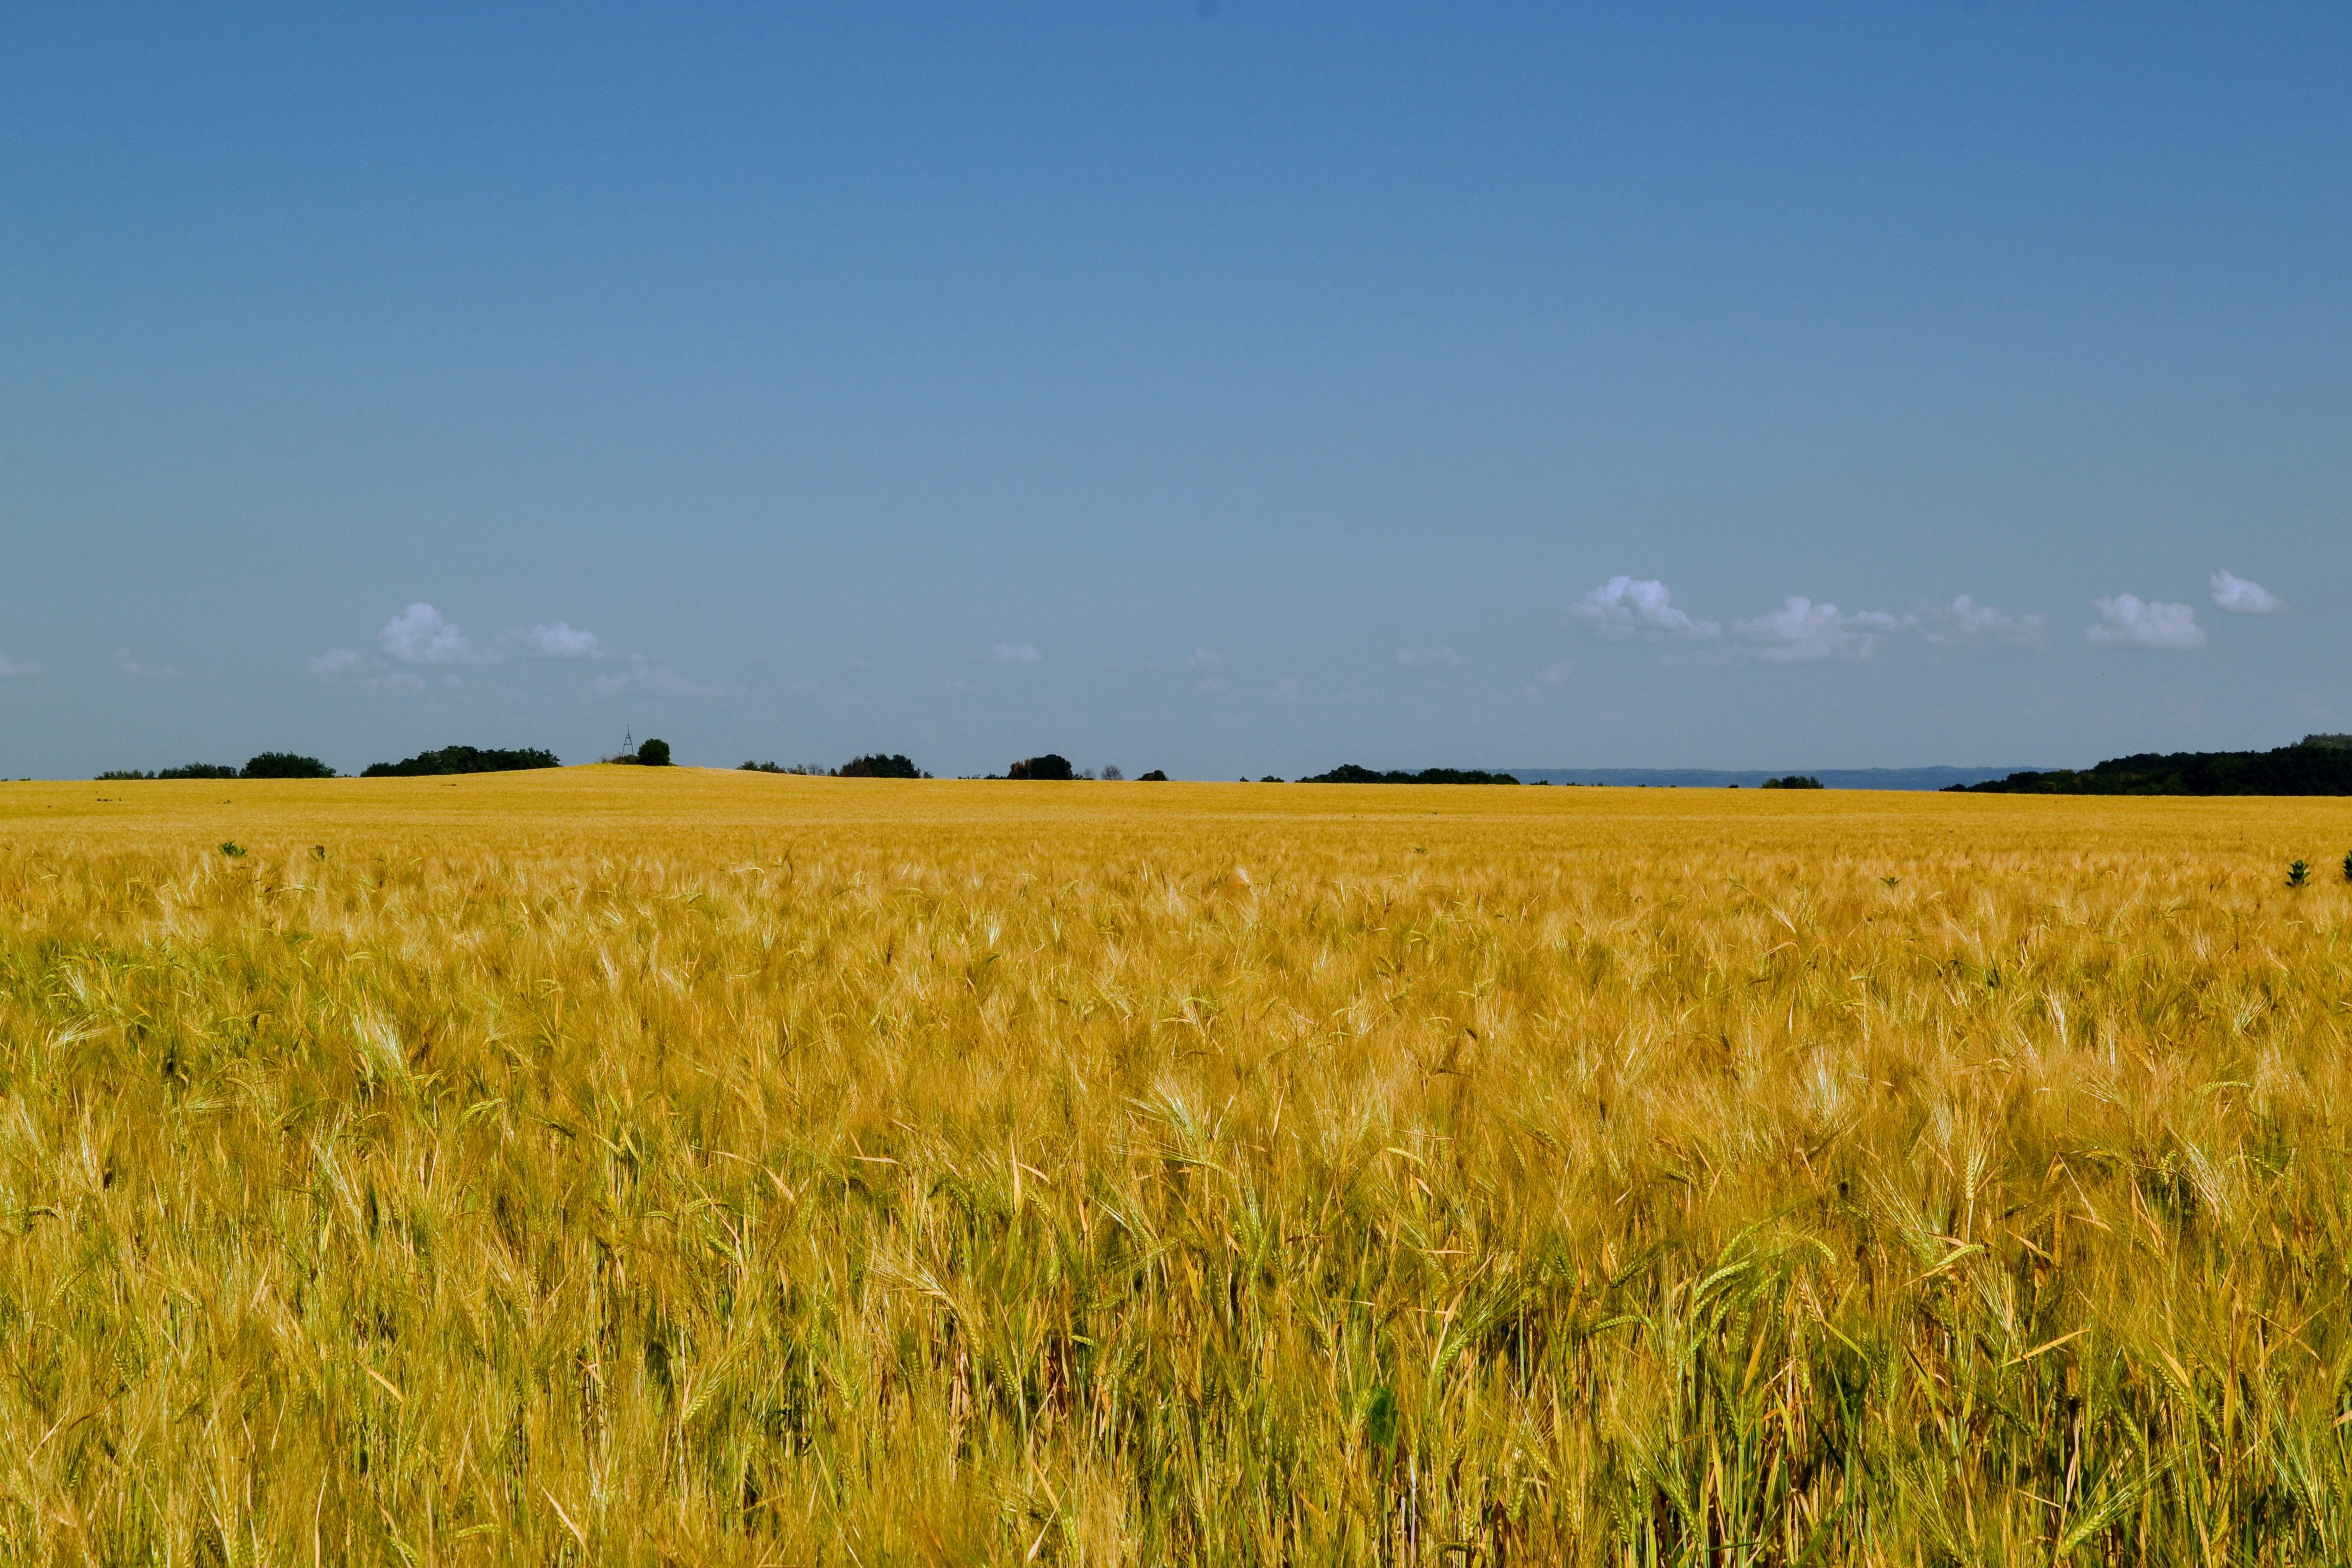 A yellow wheat field contrasts with a bright blue sky